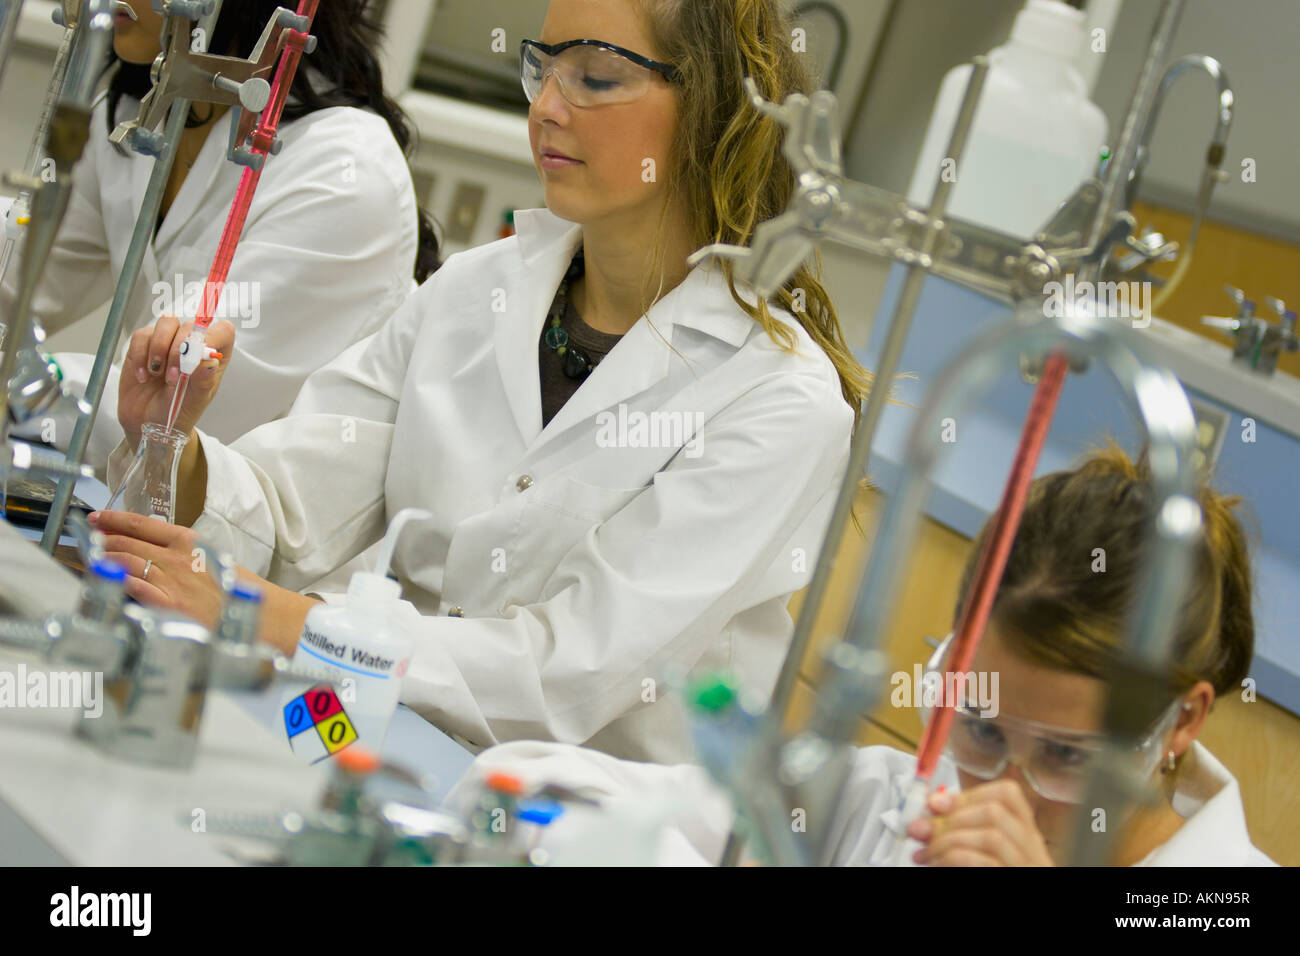 Woman in science lab Stock Photo